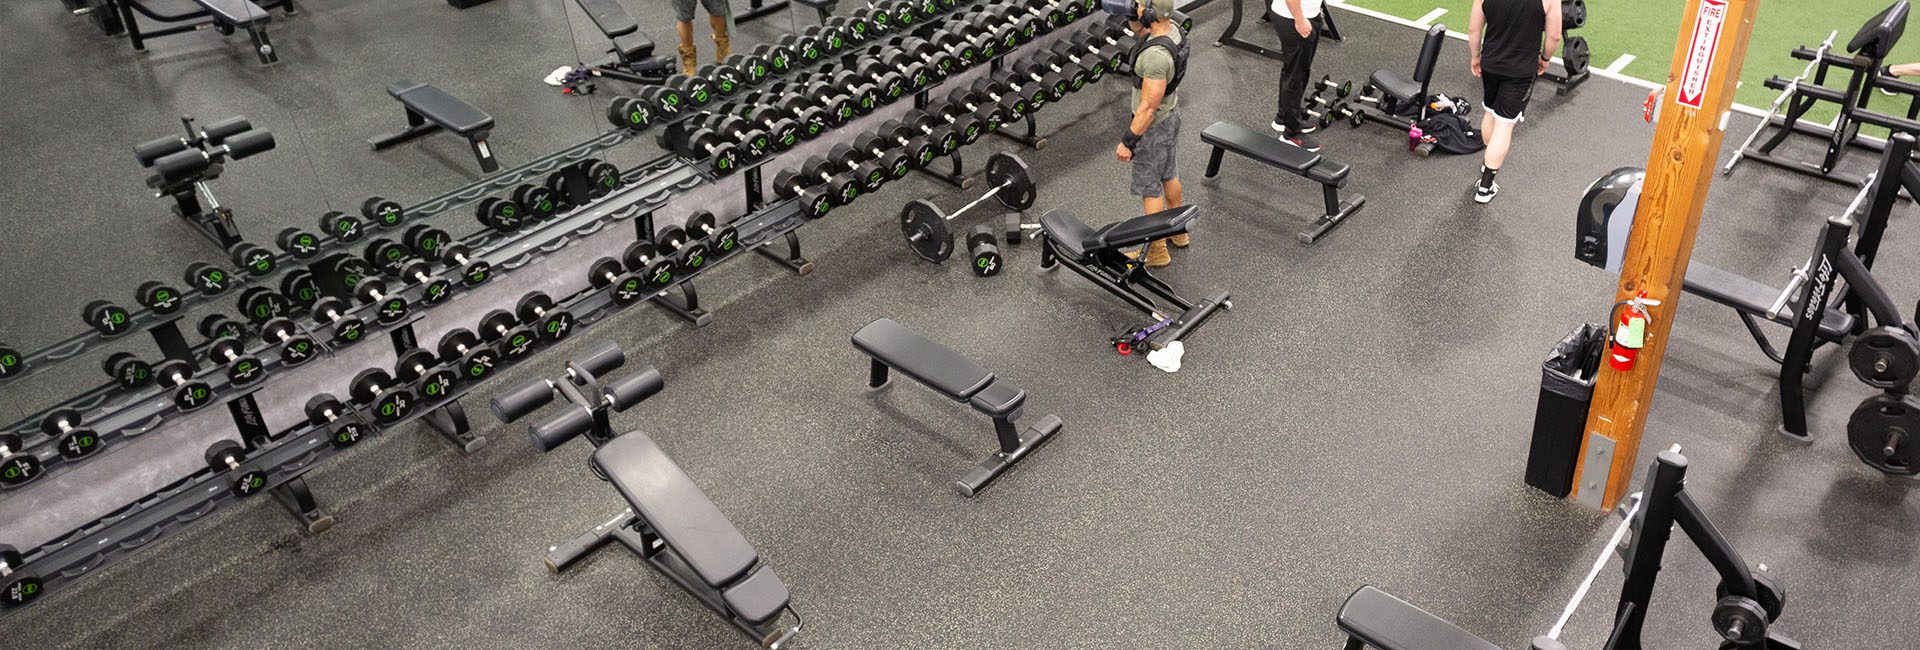 people working out in the strength training area of a modern gym